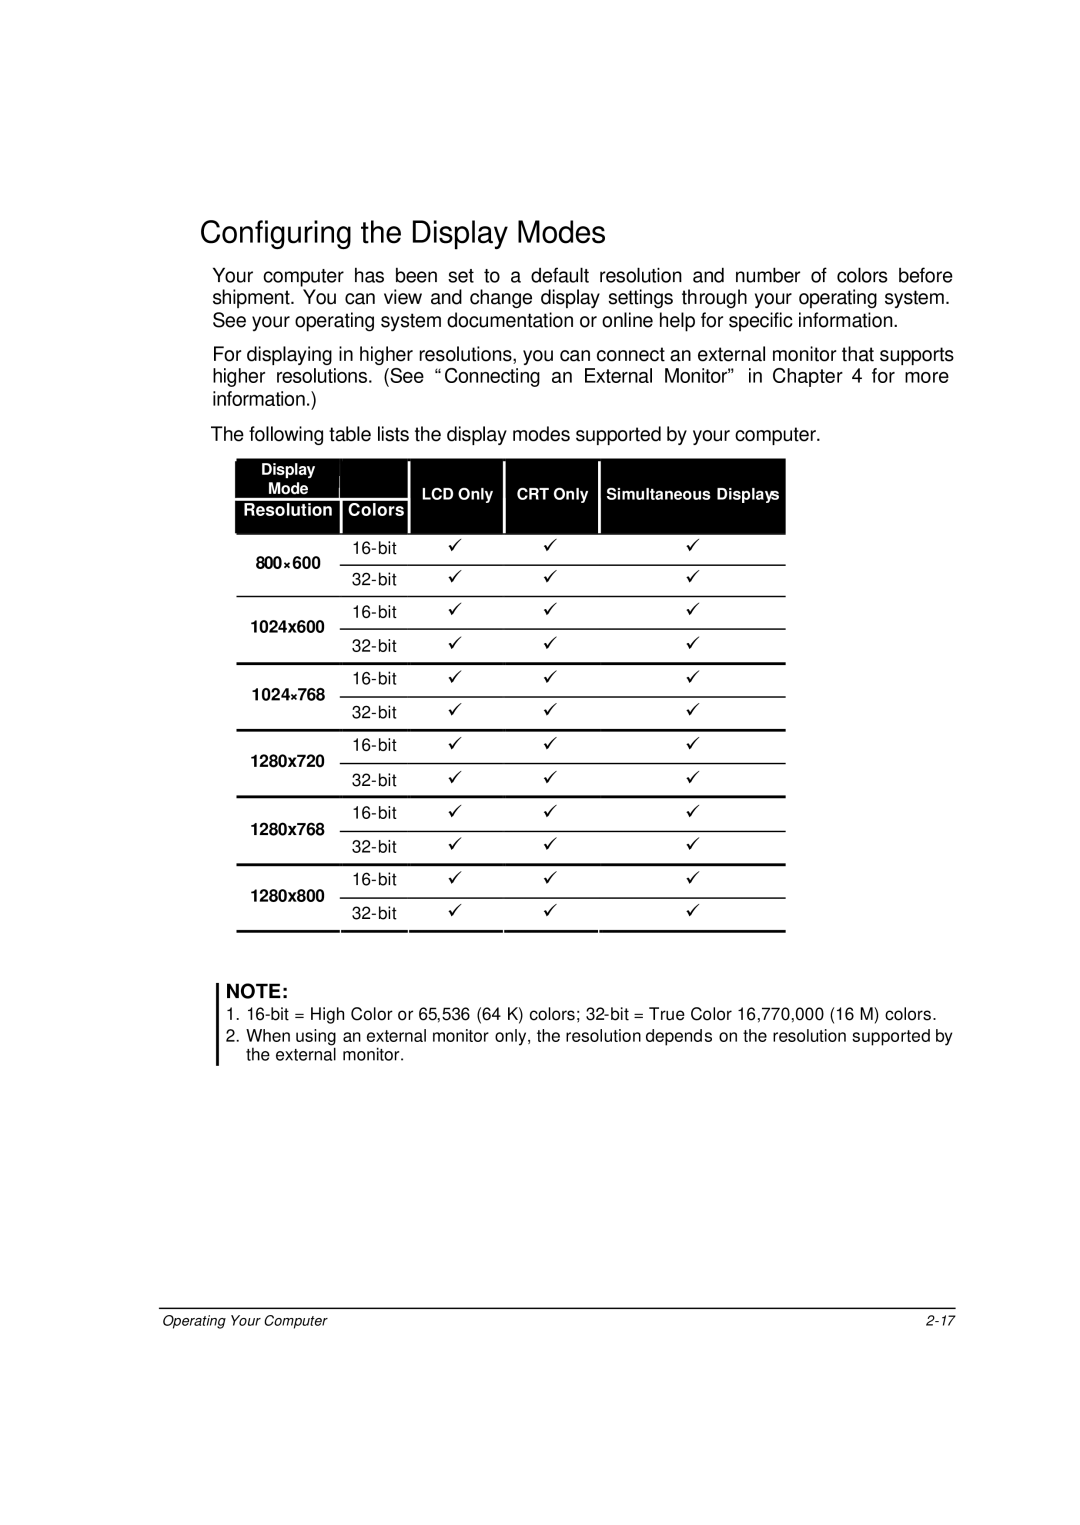 Motorola ML910 owner manual Configuring the Display Modes, Resolution Colors 